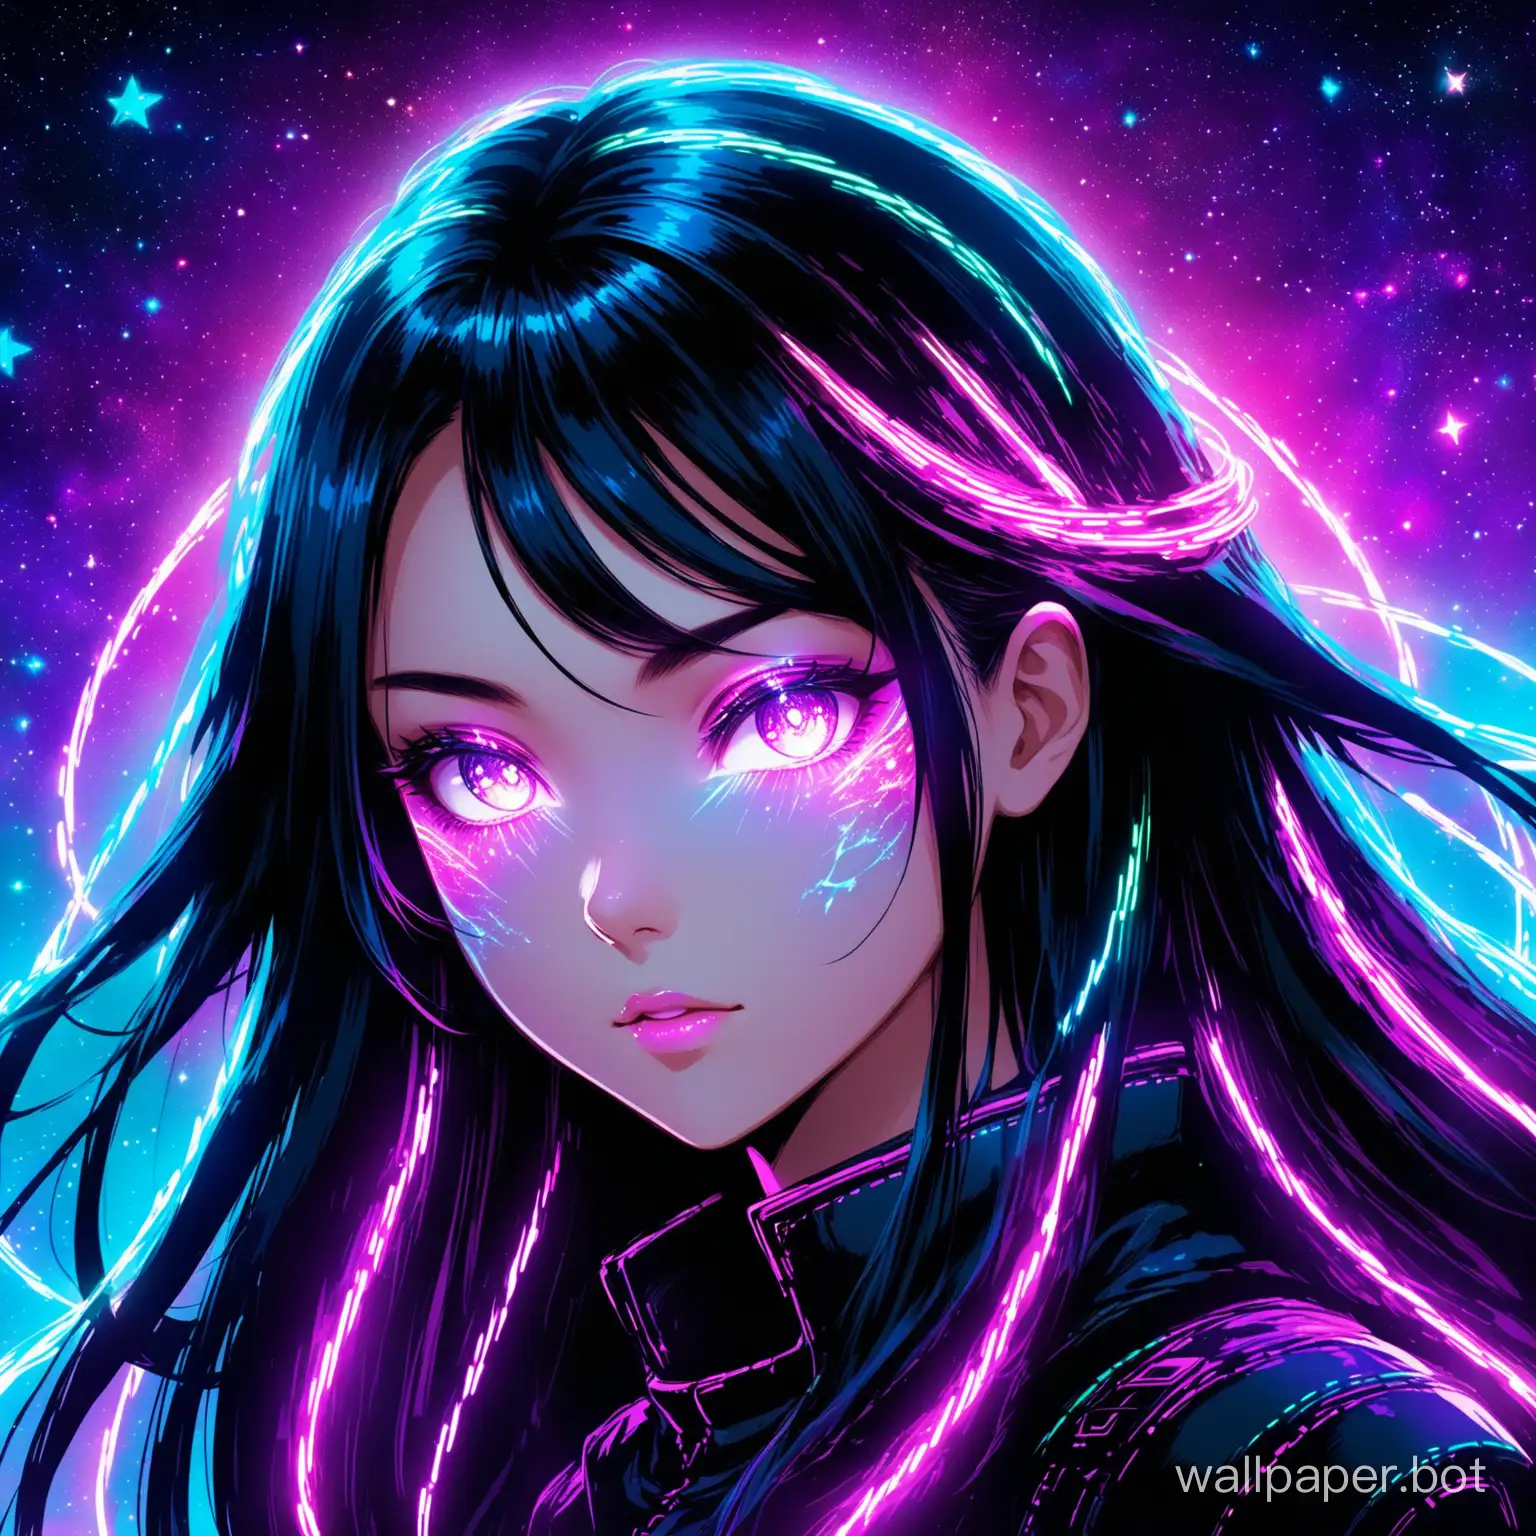 Futuristic-Cyberpunk-Girl-with-Glowing-Aura-and-UniverseInspired-Hair